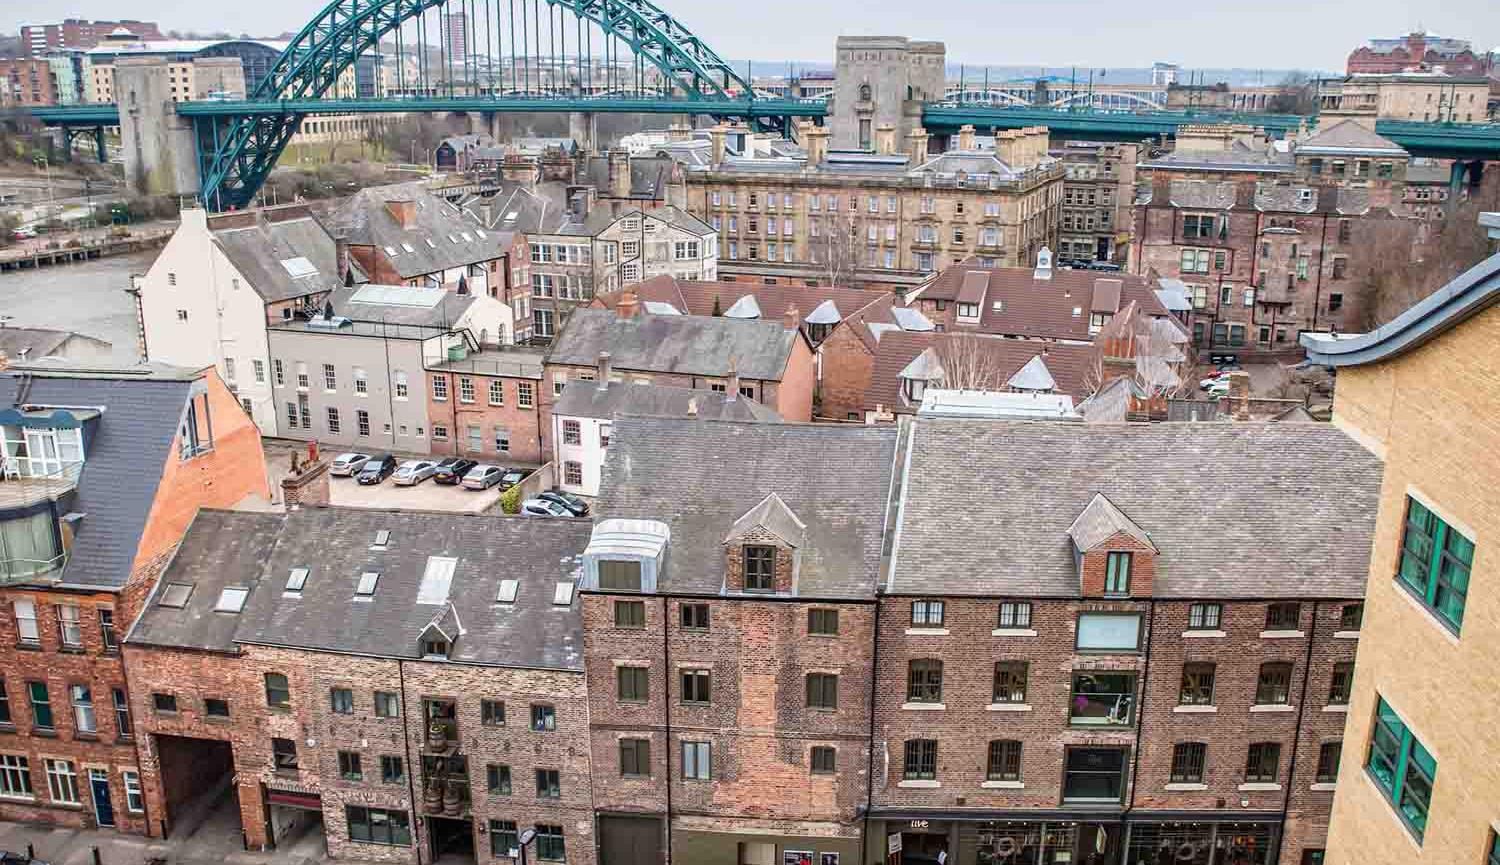 Aerial photo of Live Theatre buildings with Tyne Bridge in background